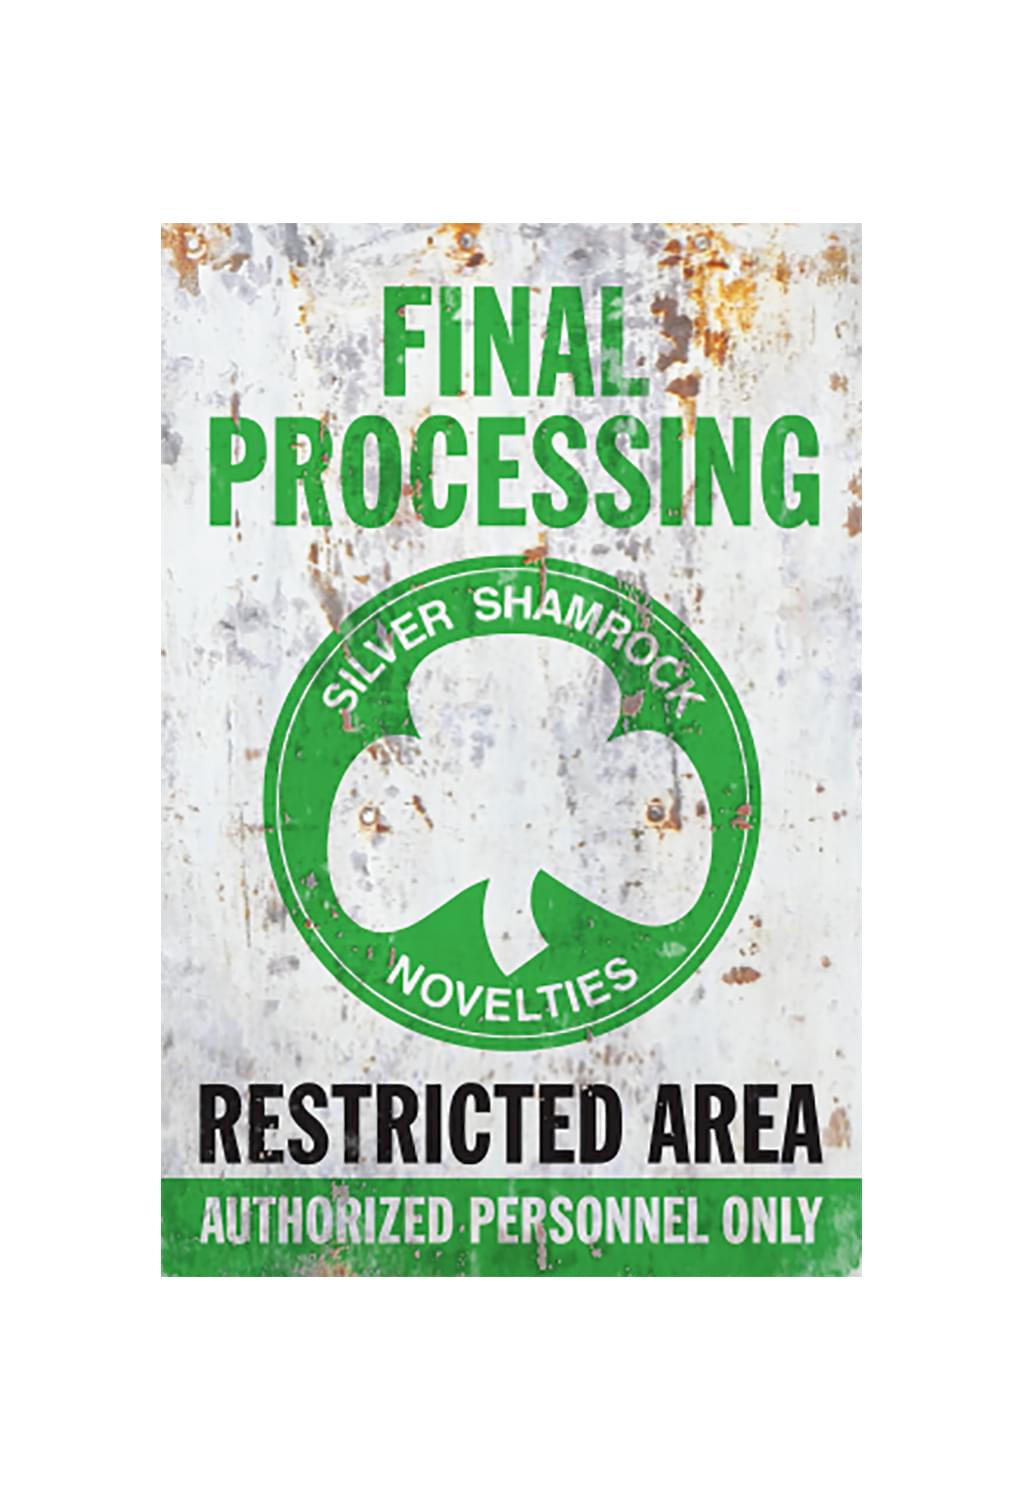 Halloween 3 Season of the Witch Final Processing Metal Sign